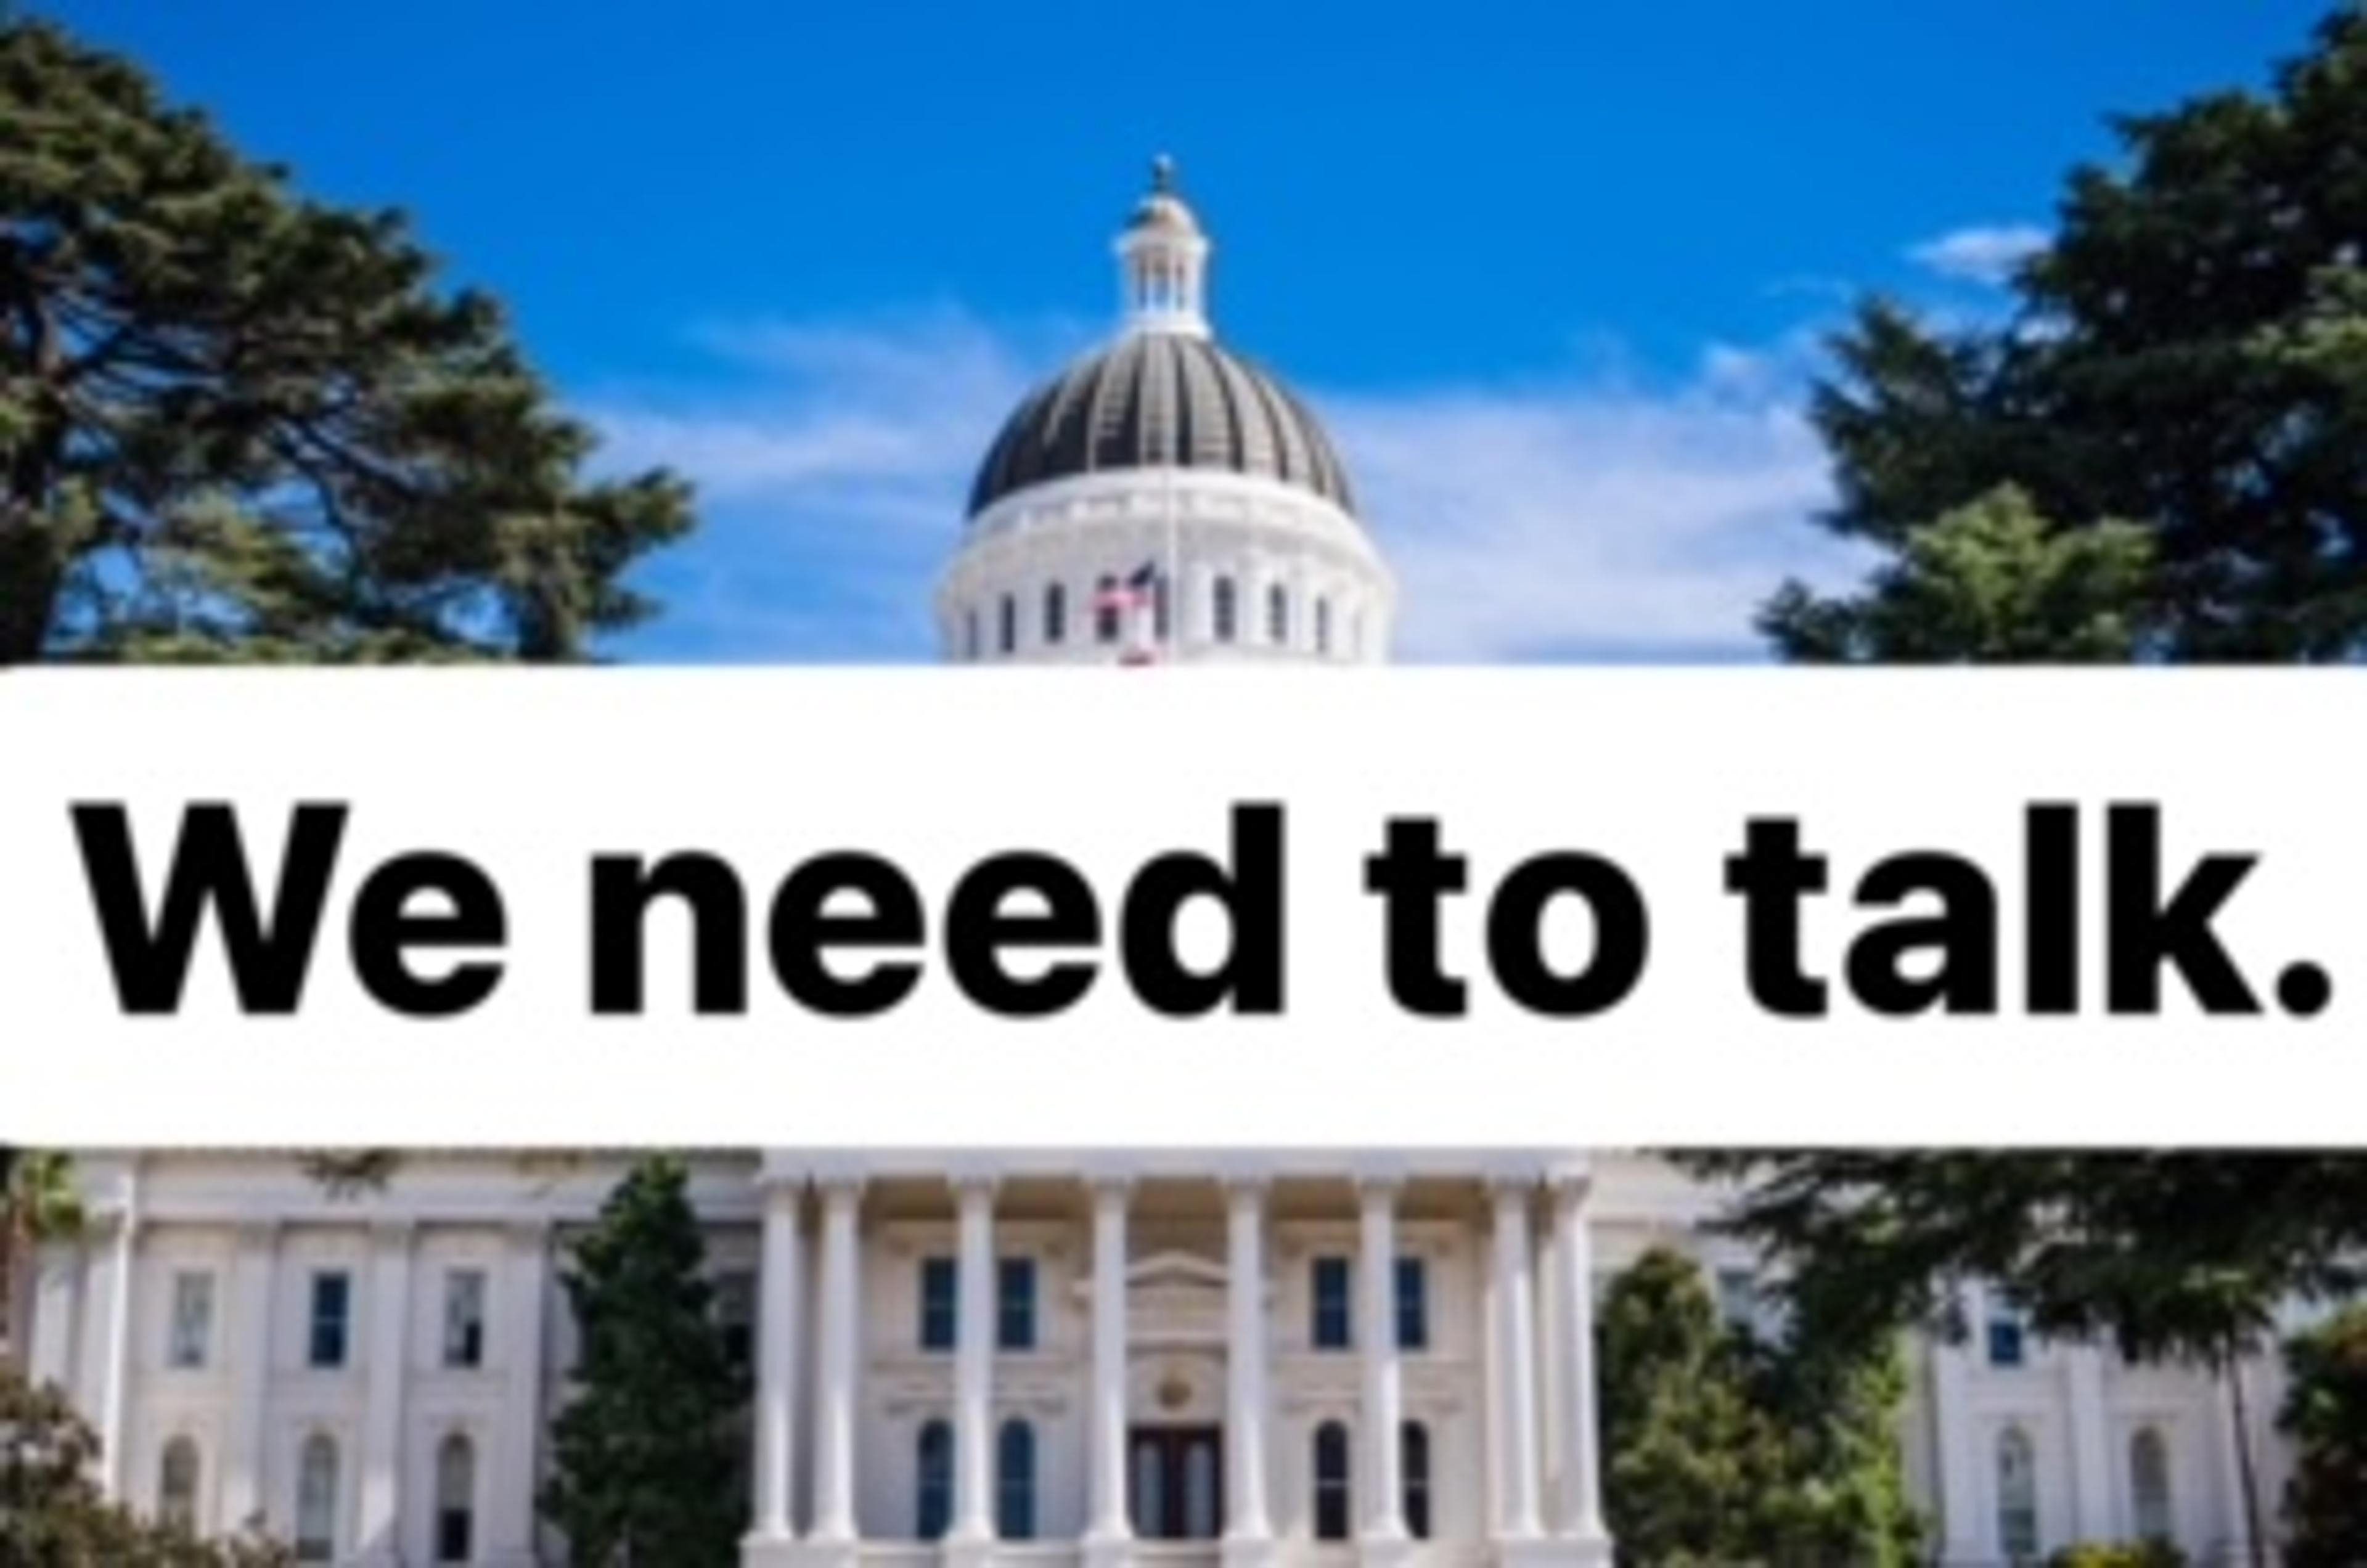 "We need to talk" superimposed over an image of the California State Capitol Building.